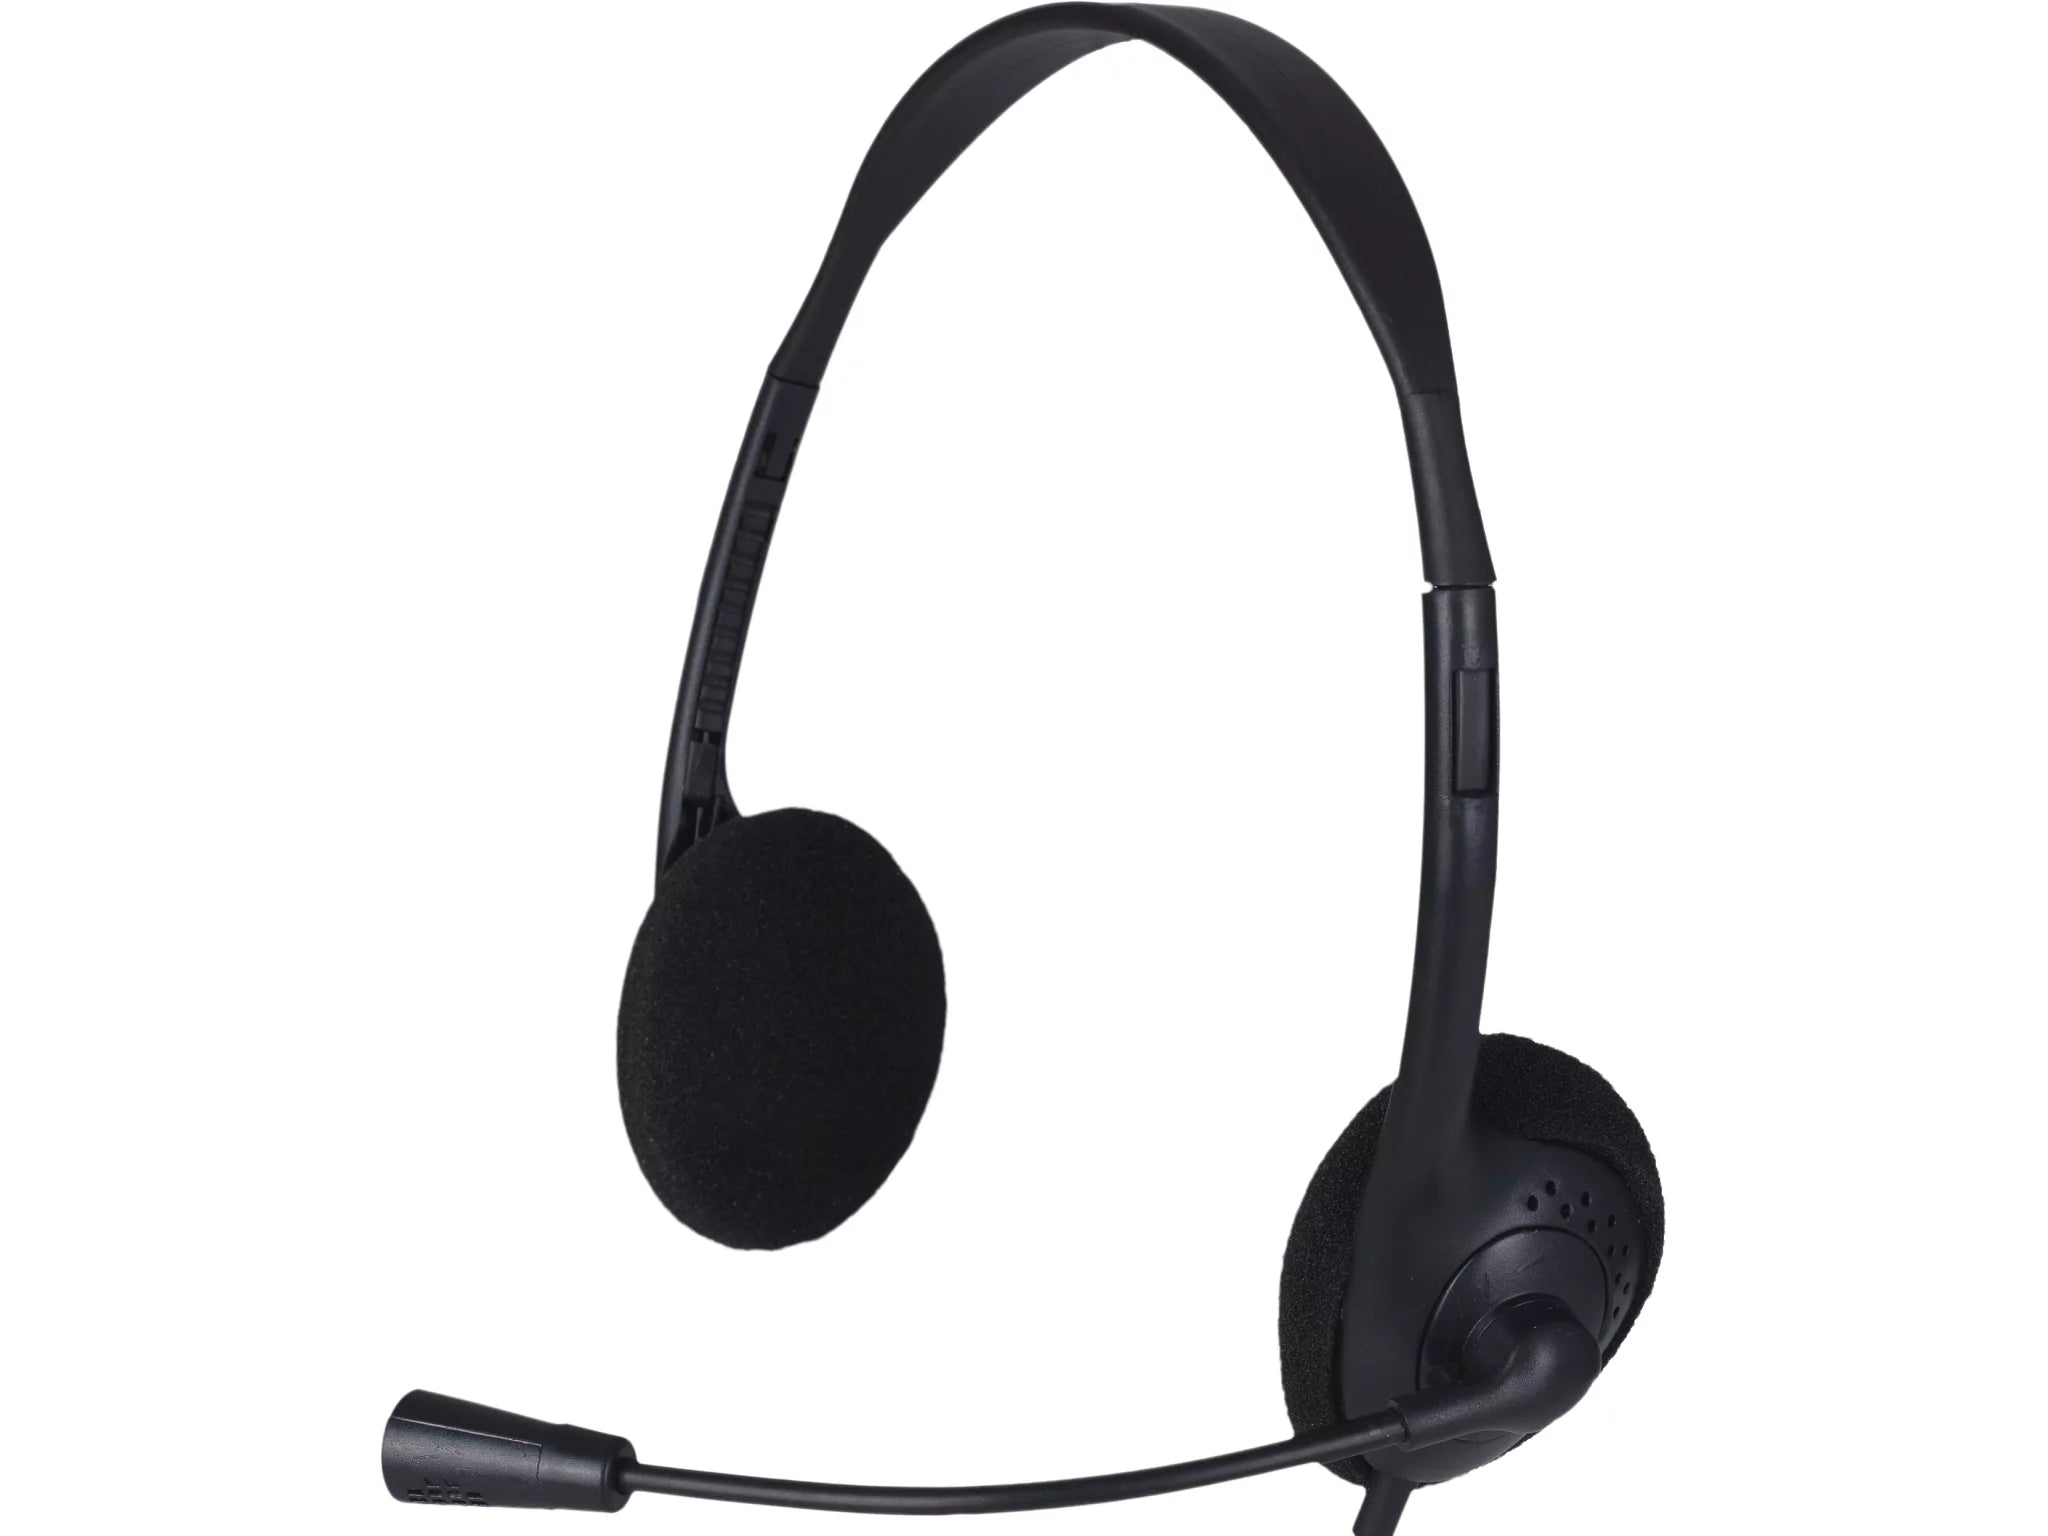 USB headset with Mic